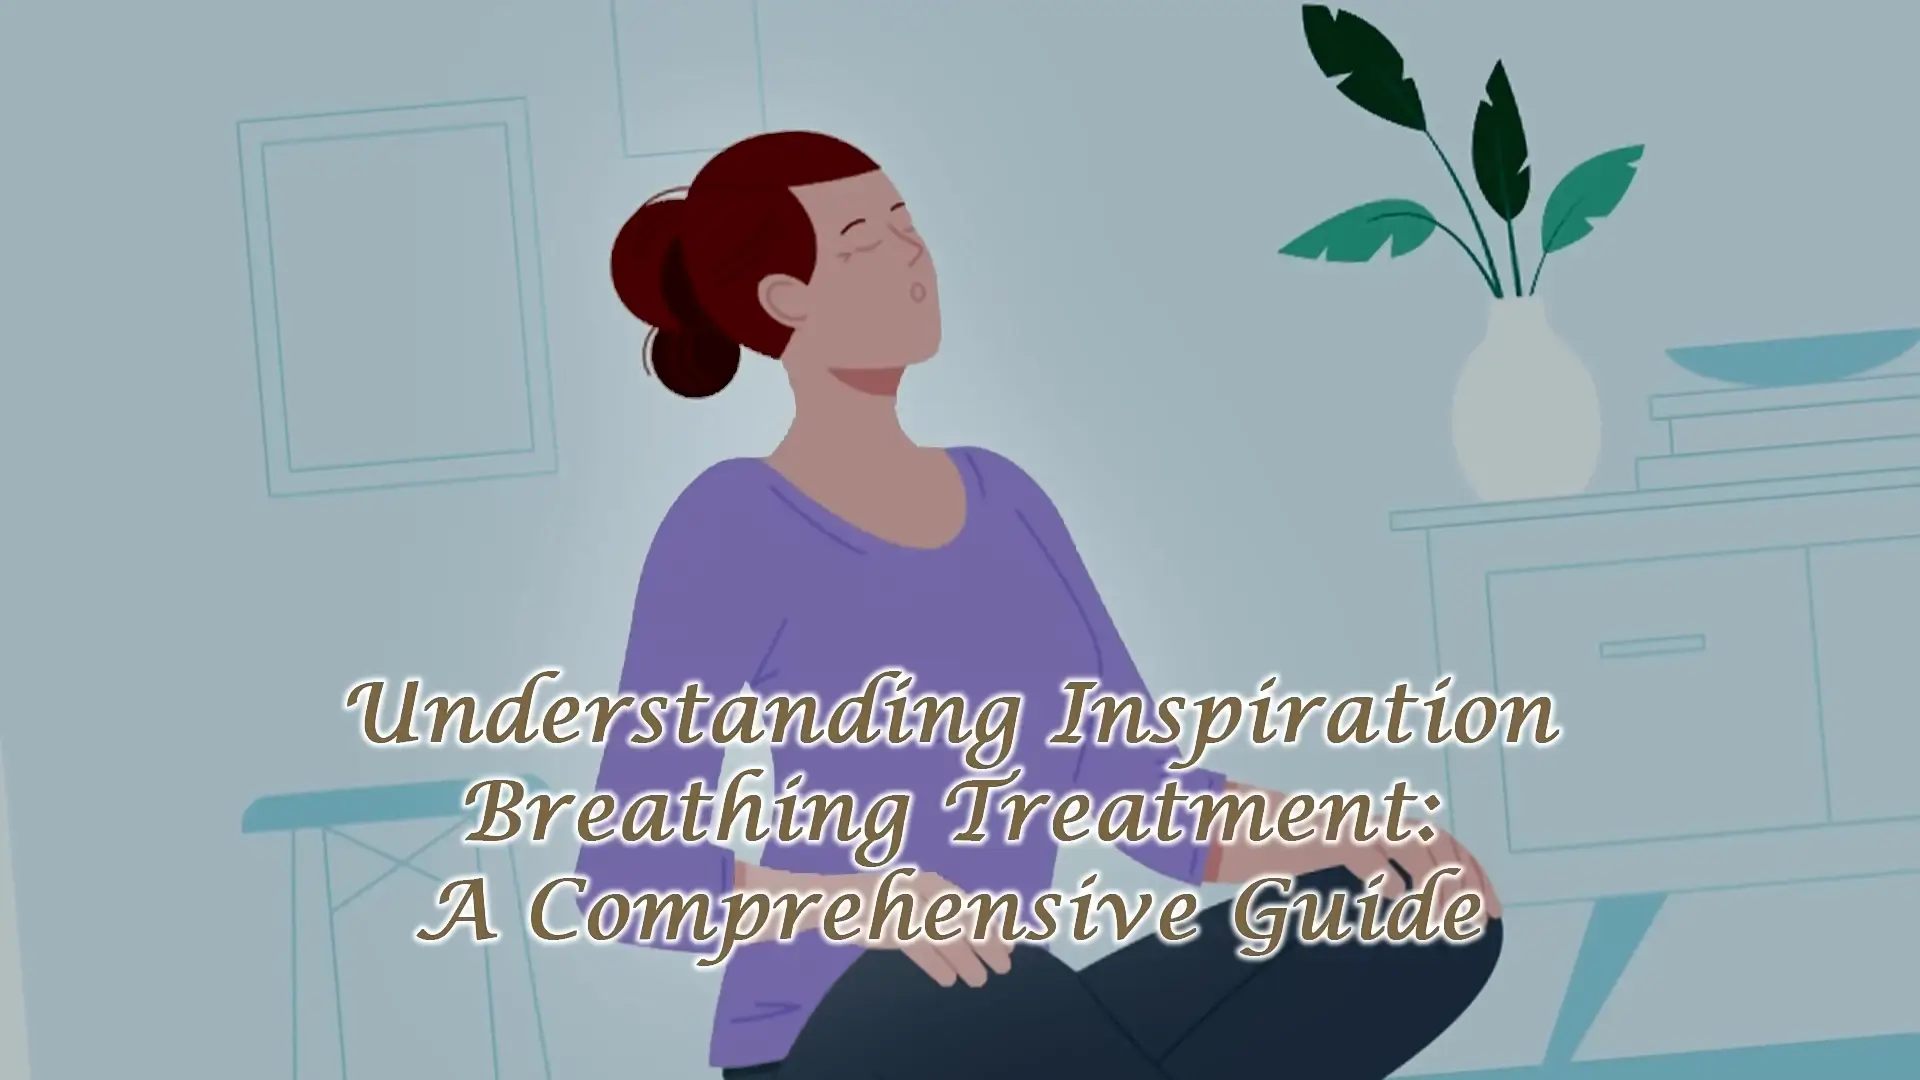 What Is Inspiration Breathing Treatment?